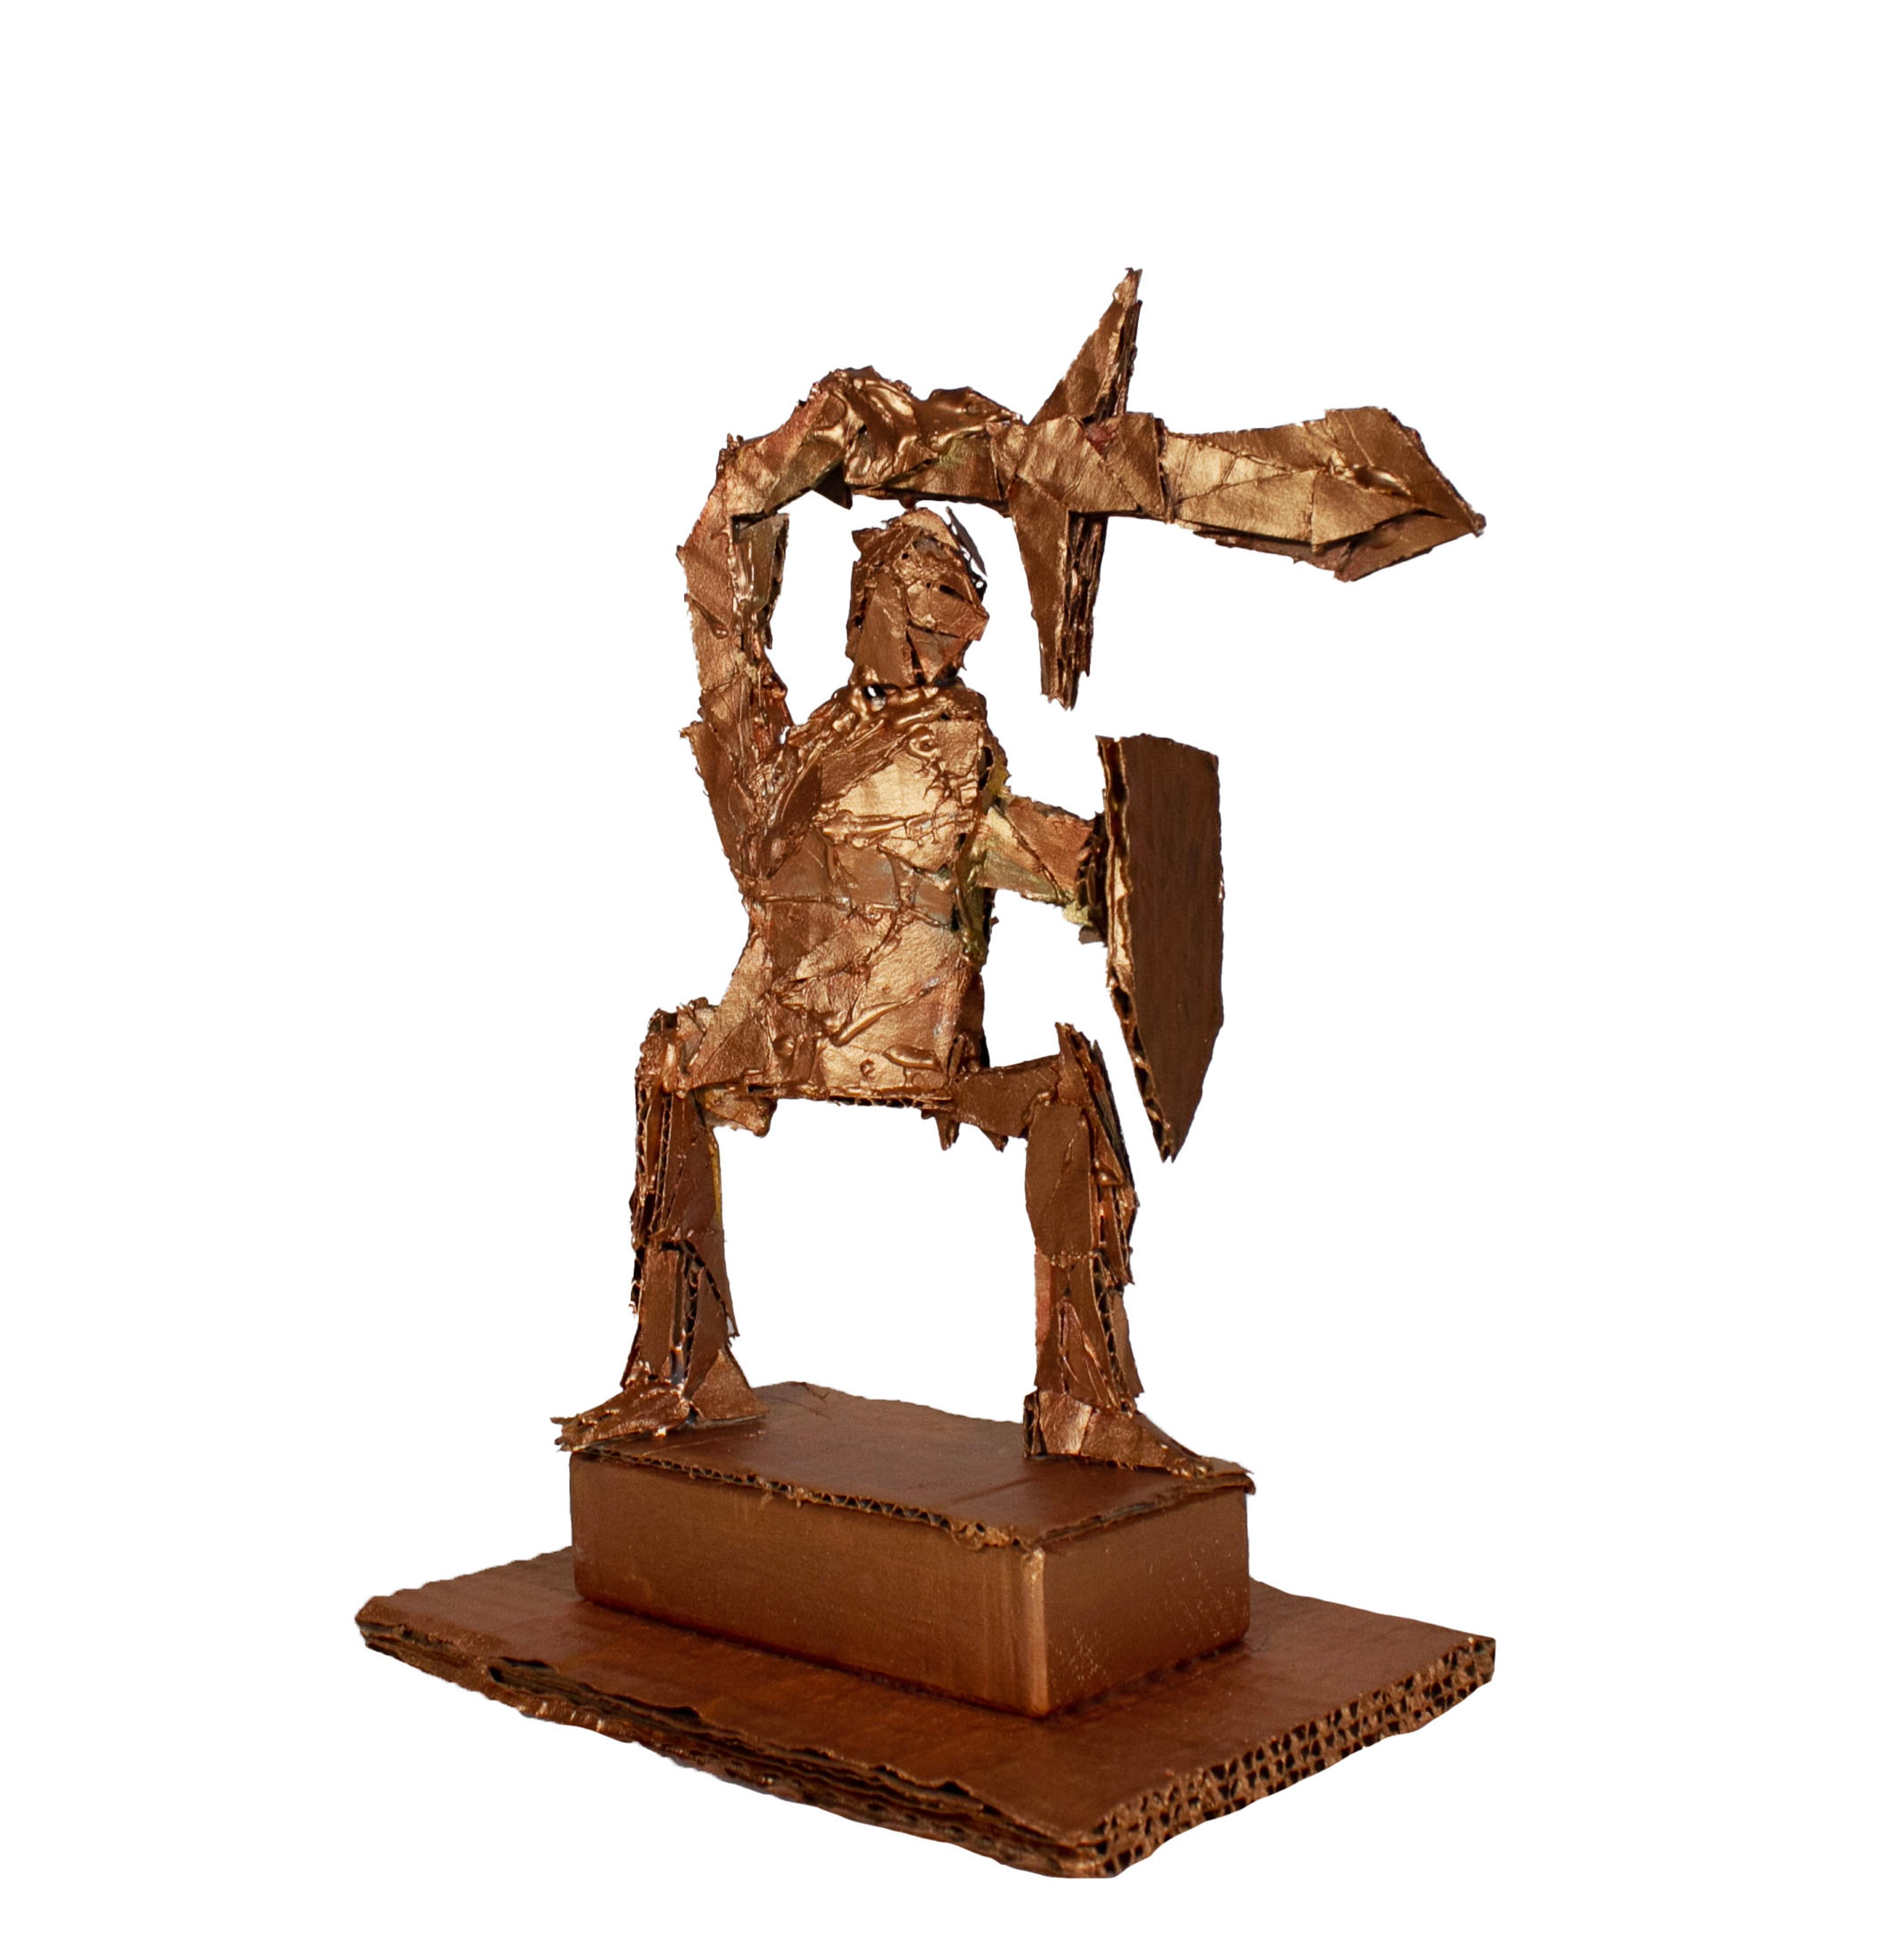 Cardboard-and–metallic paint sculpture of Orion facing right, represented as a copper-colored abstract figure, standing on a platform, holding a shield in front of him in his left hand and a sword pointed forward over his head in his right hand. 